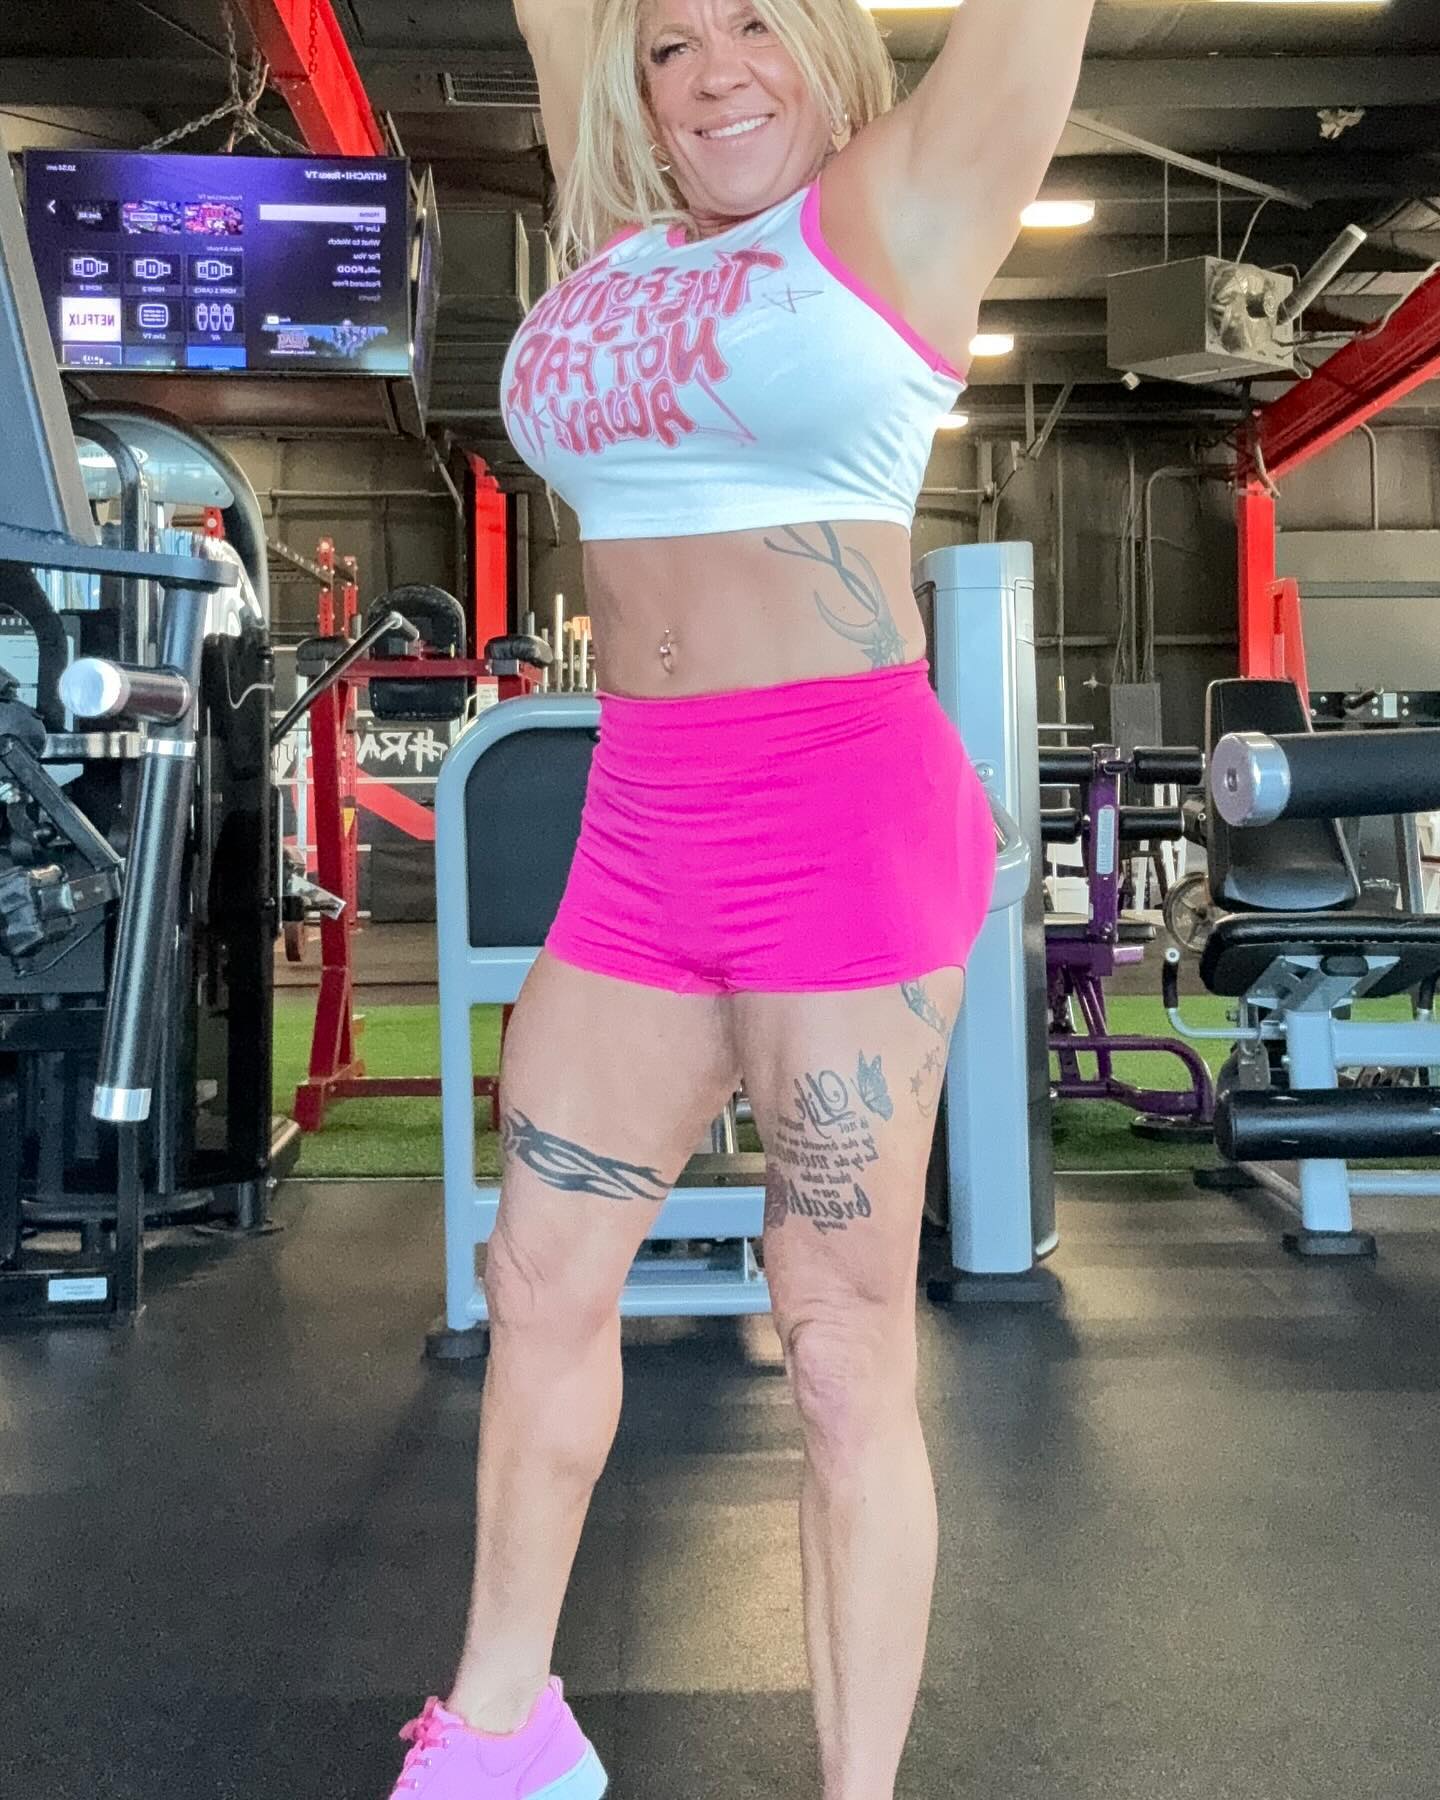 Friday afternoon gym selfies 💪🏻 Got these shorts and all different colors and love them! #Shein #bootyshortsseason🍑 #Fitness #Beautiful #Smile #FYP #MusclesAreSexy #FitMom #explorerpages